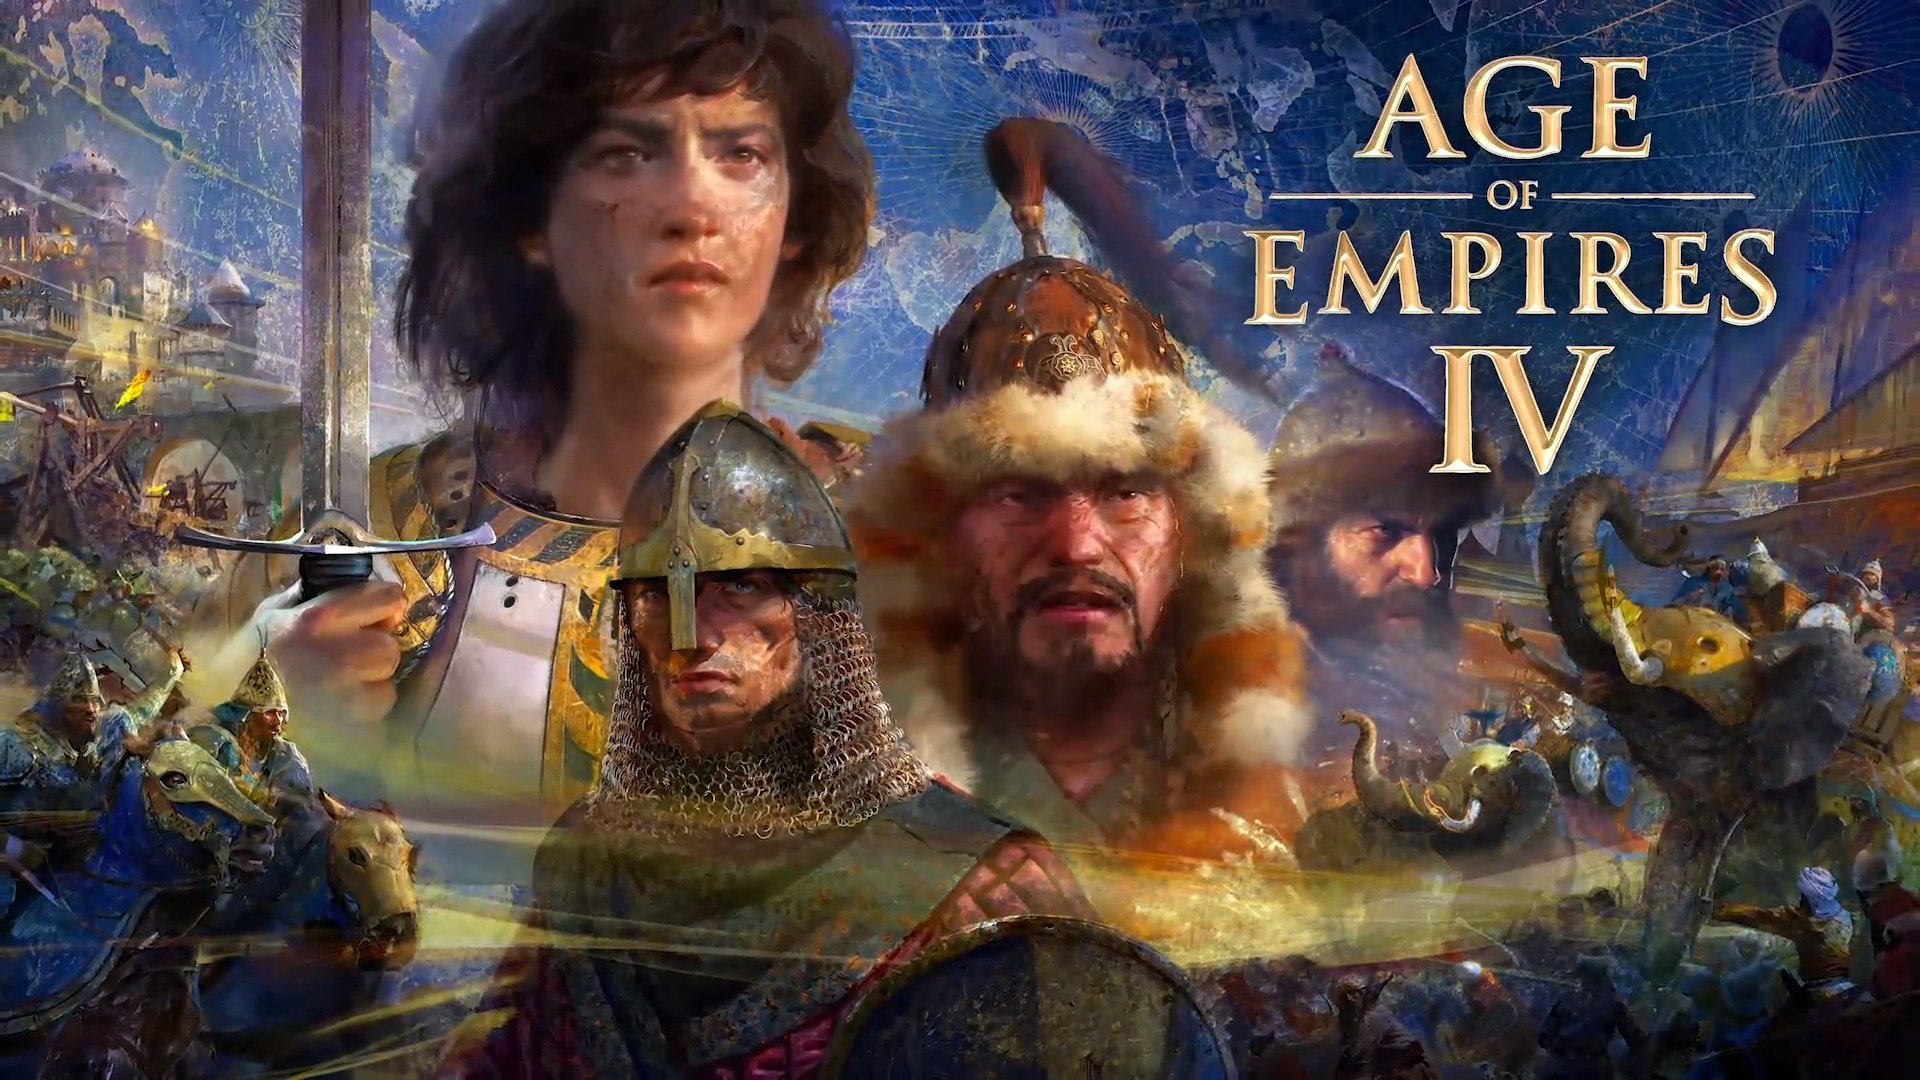 Age of Empires IV Launches October 28